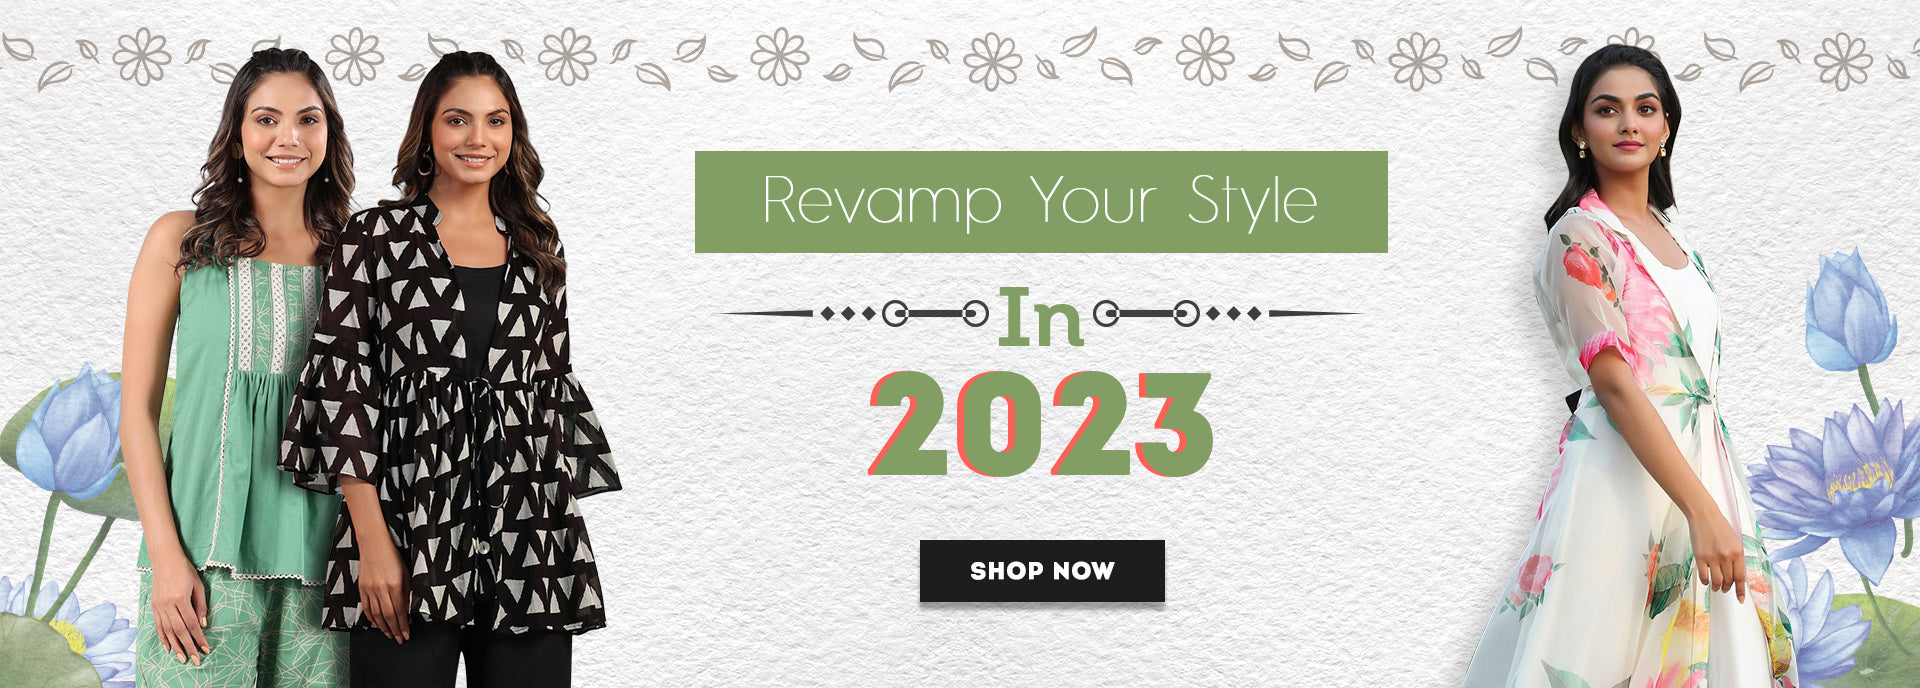 Revamp Your Style in 2023 with Our Flawless Ensembles